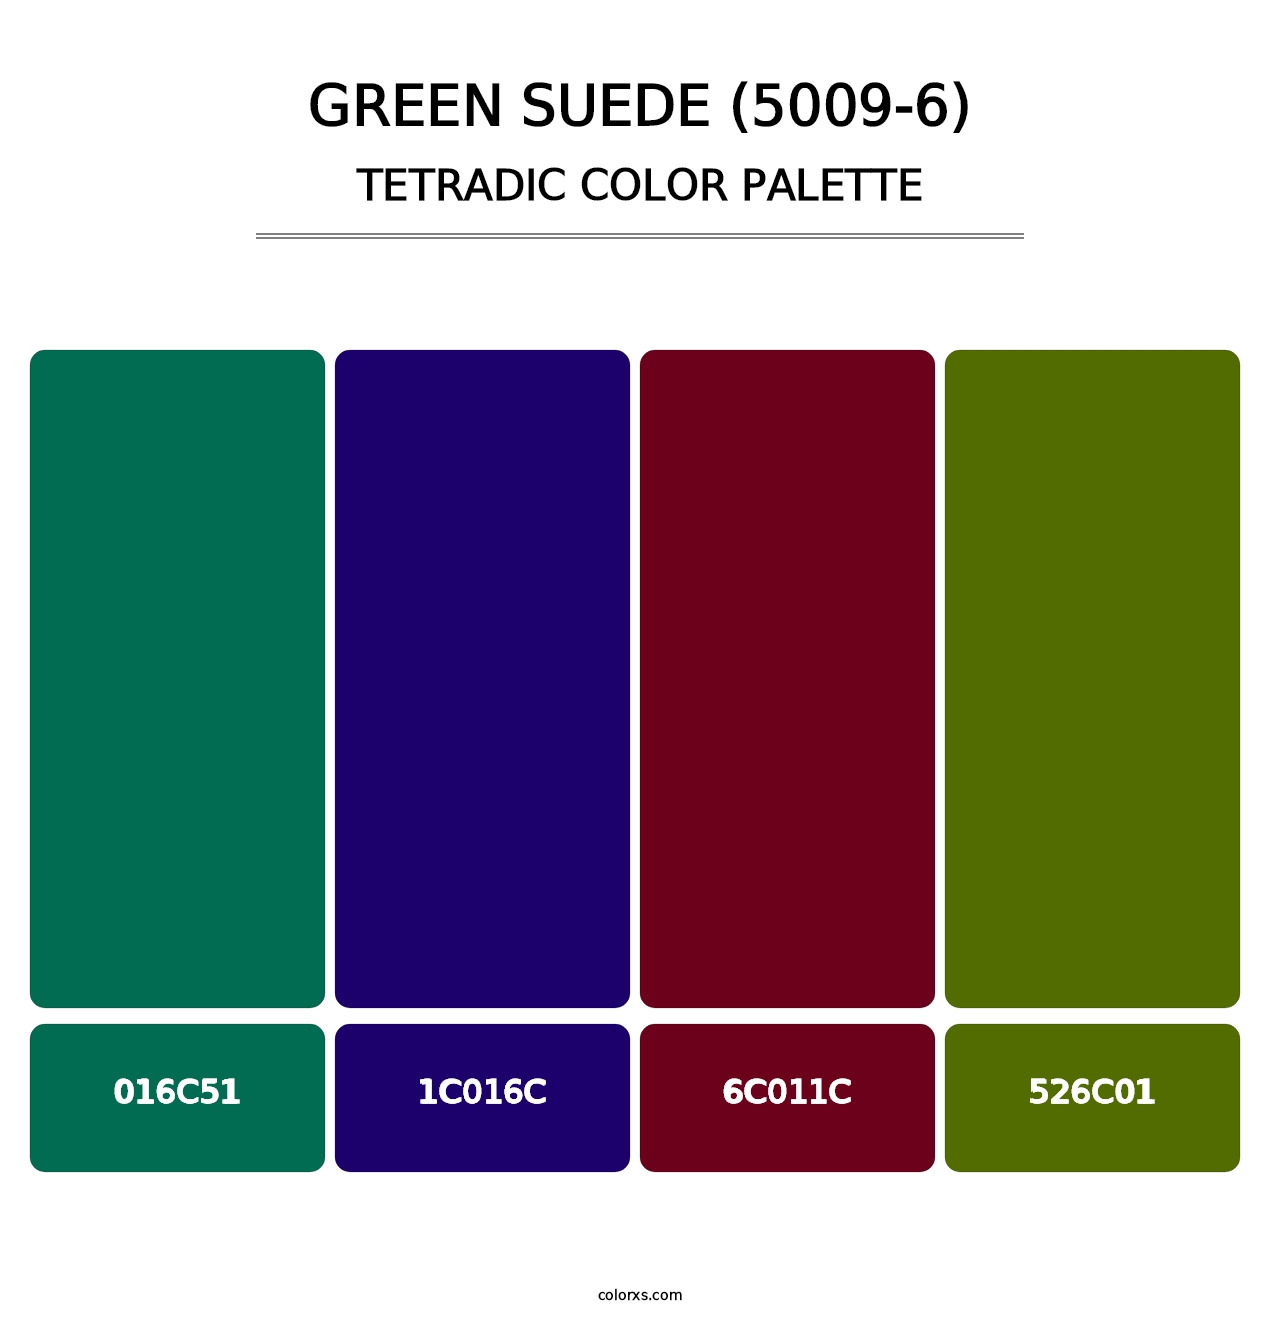 Green Suede (5009-6) - Tetradic Color Palette